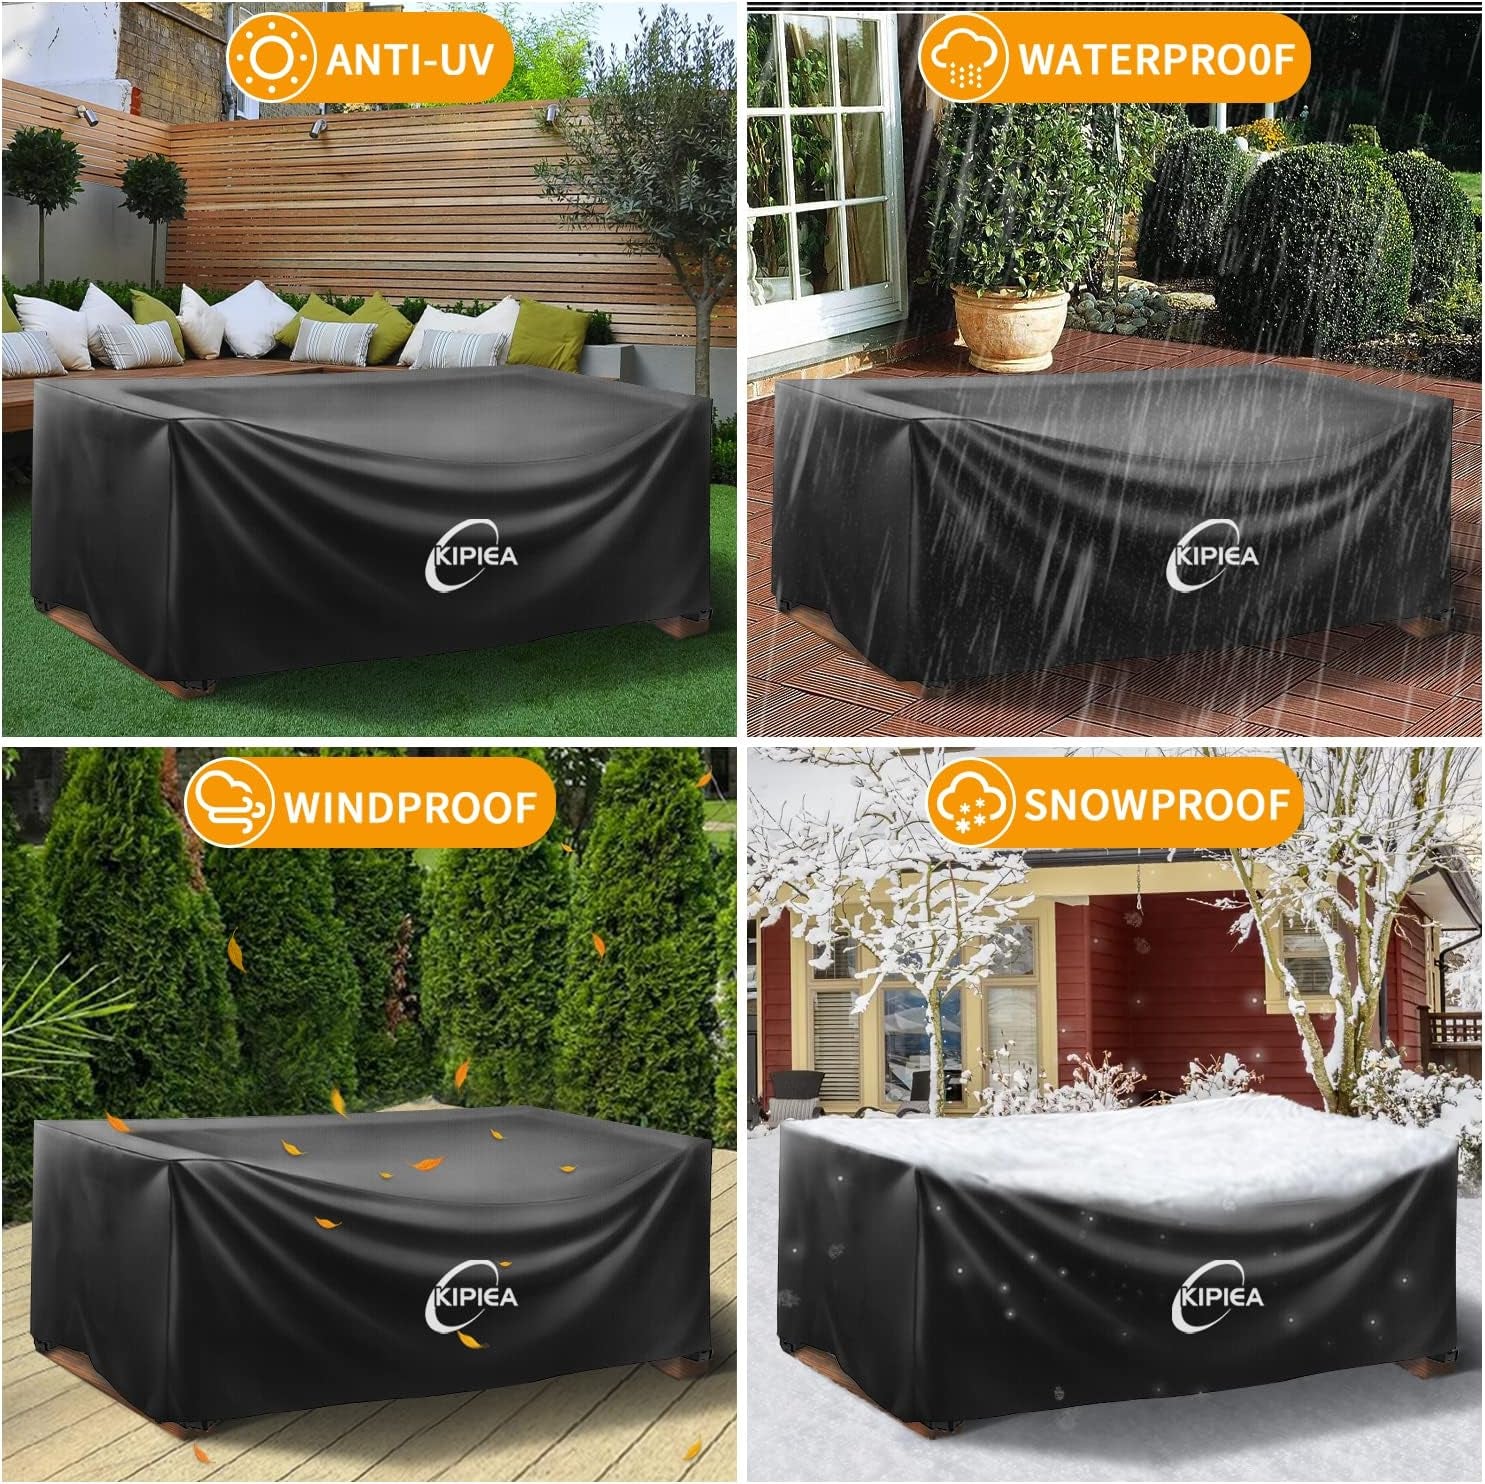 600D Patio Furniture Covers Waterproof Winter, Outdoor Furniture Set Covers for Table Chairs, Heavy-Duty Outdoor Sofa Covers with anti UV and No Tears, No Fading (98" L X 98" W X 36" H)